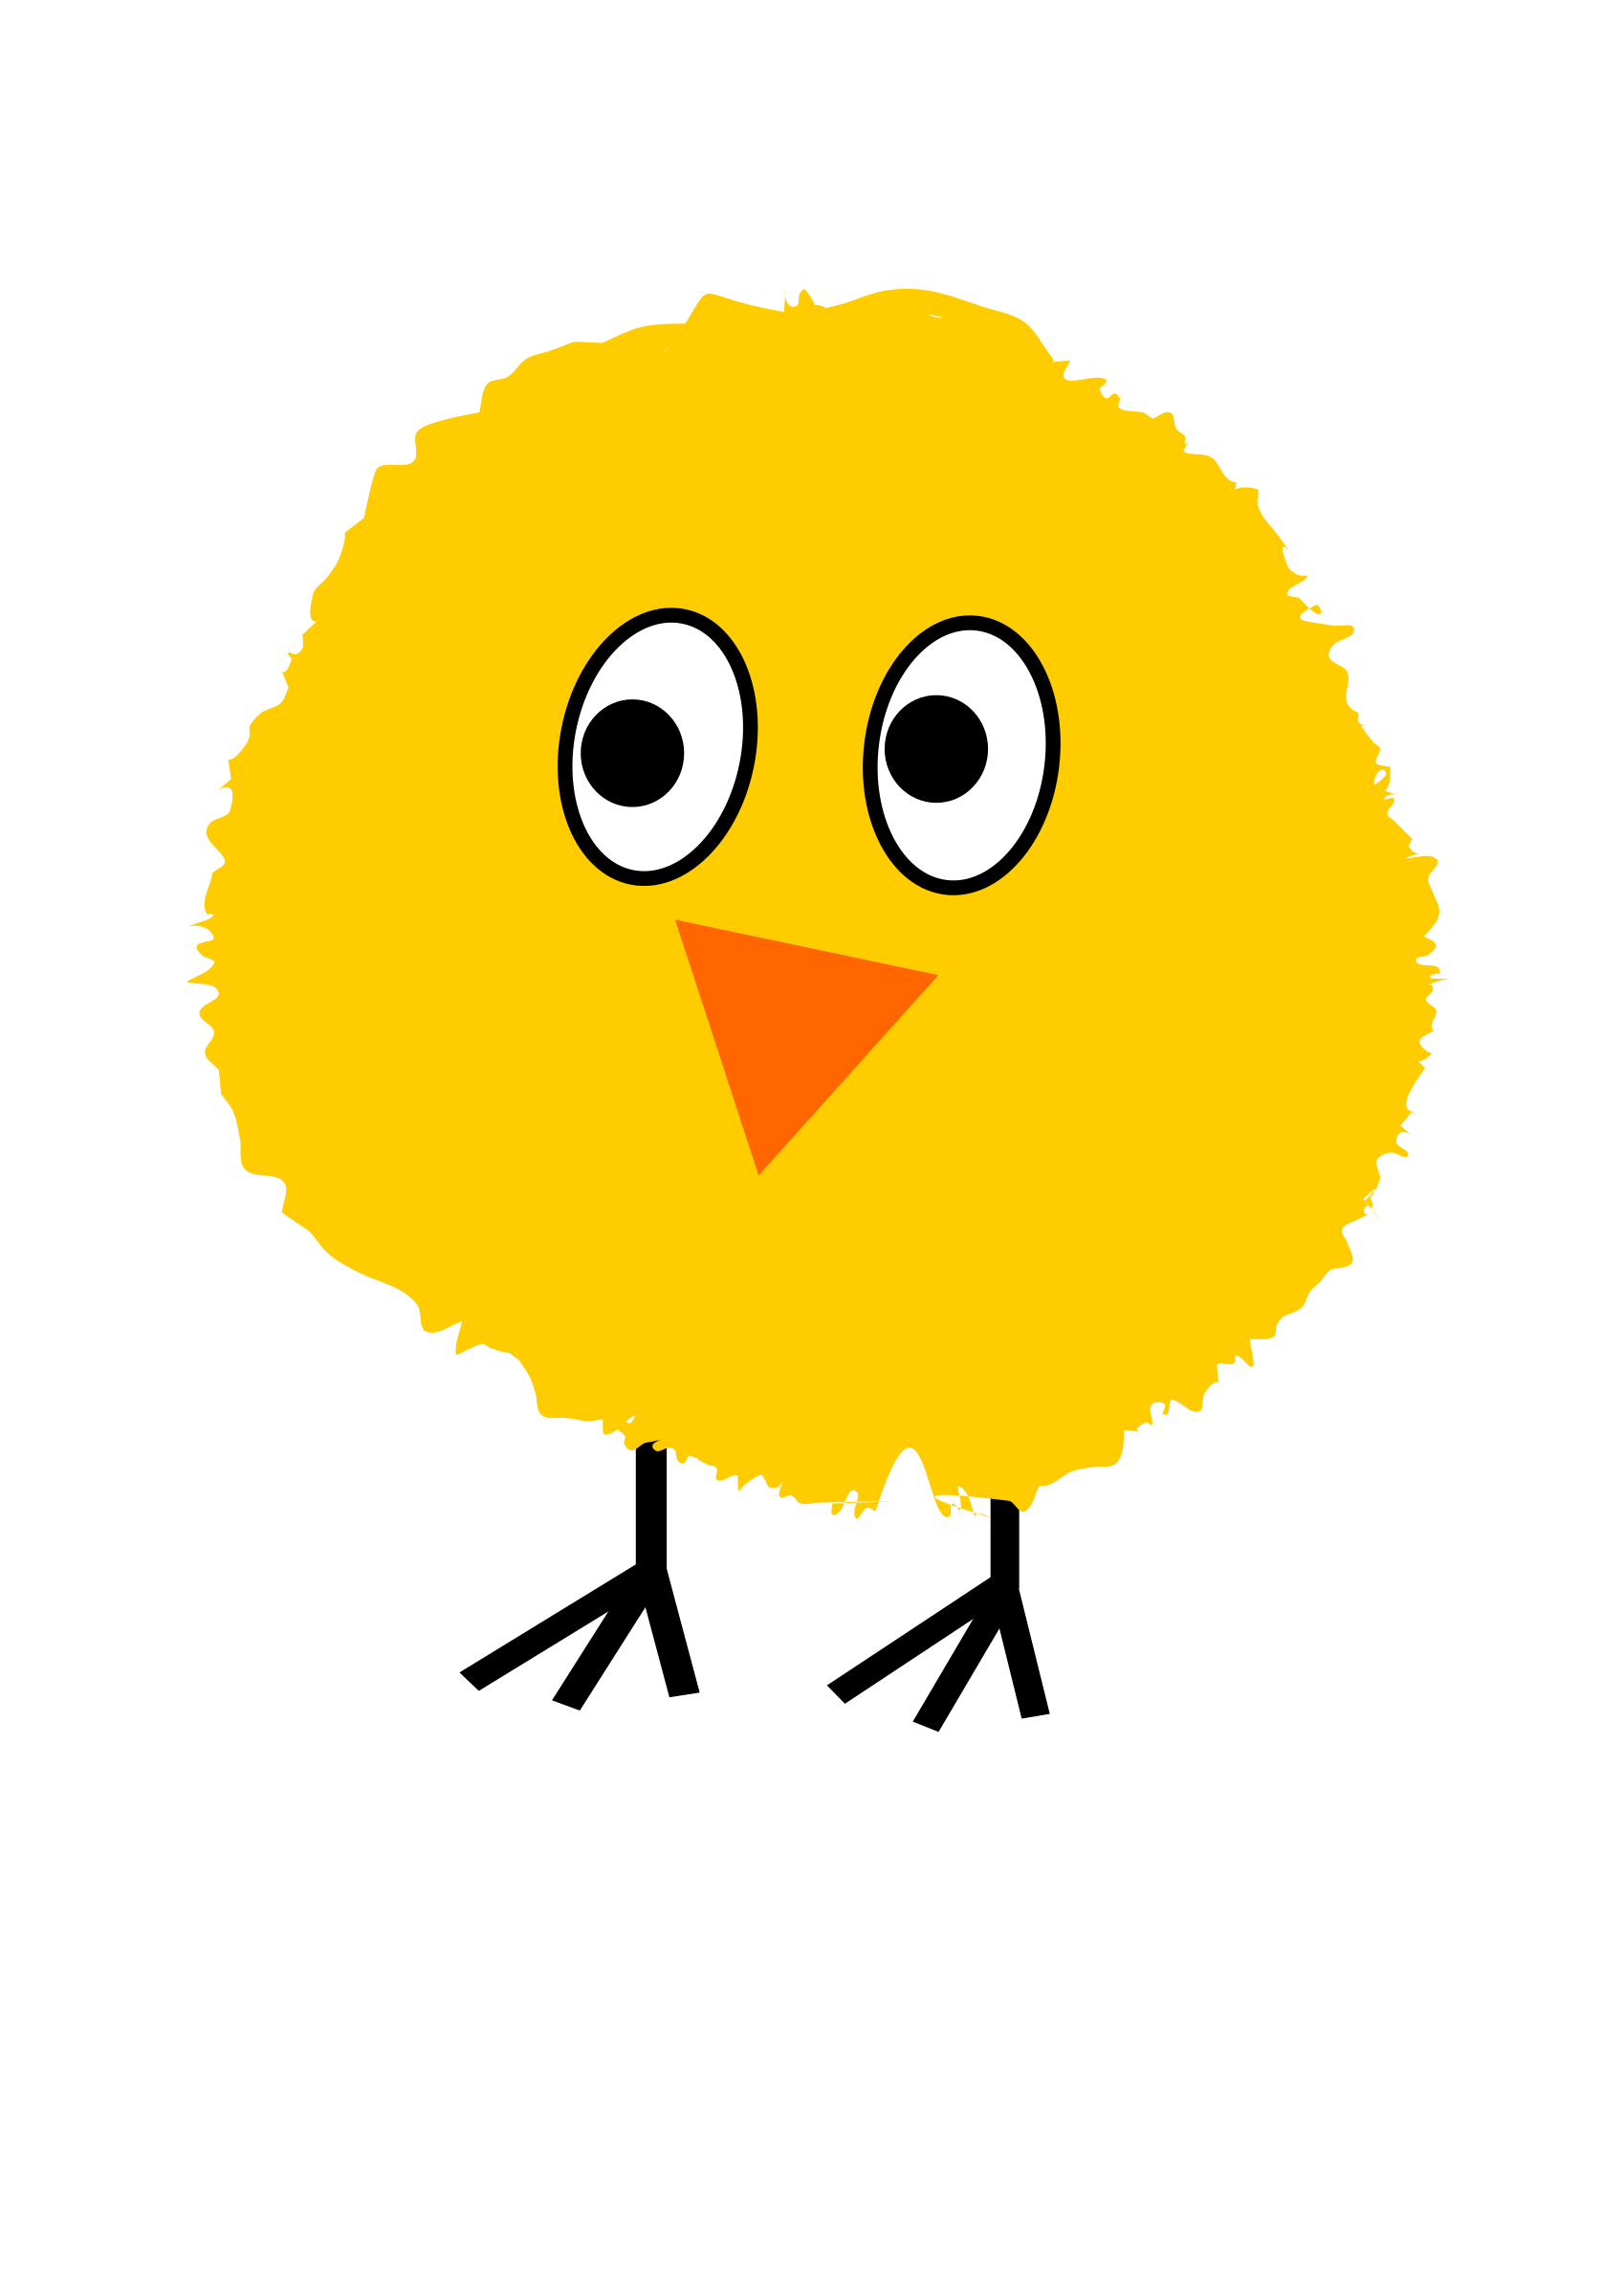 Big Image (Png) - Chick, Transparent background PNG HD thumbnail